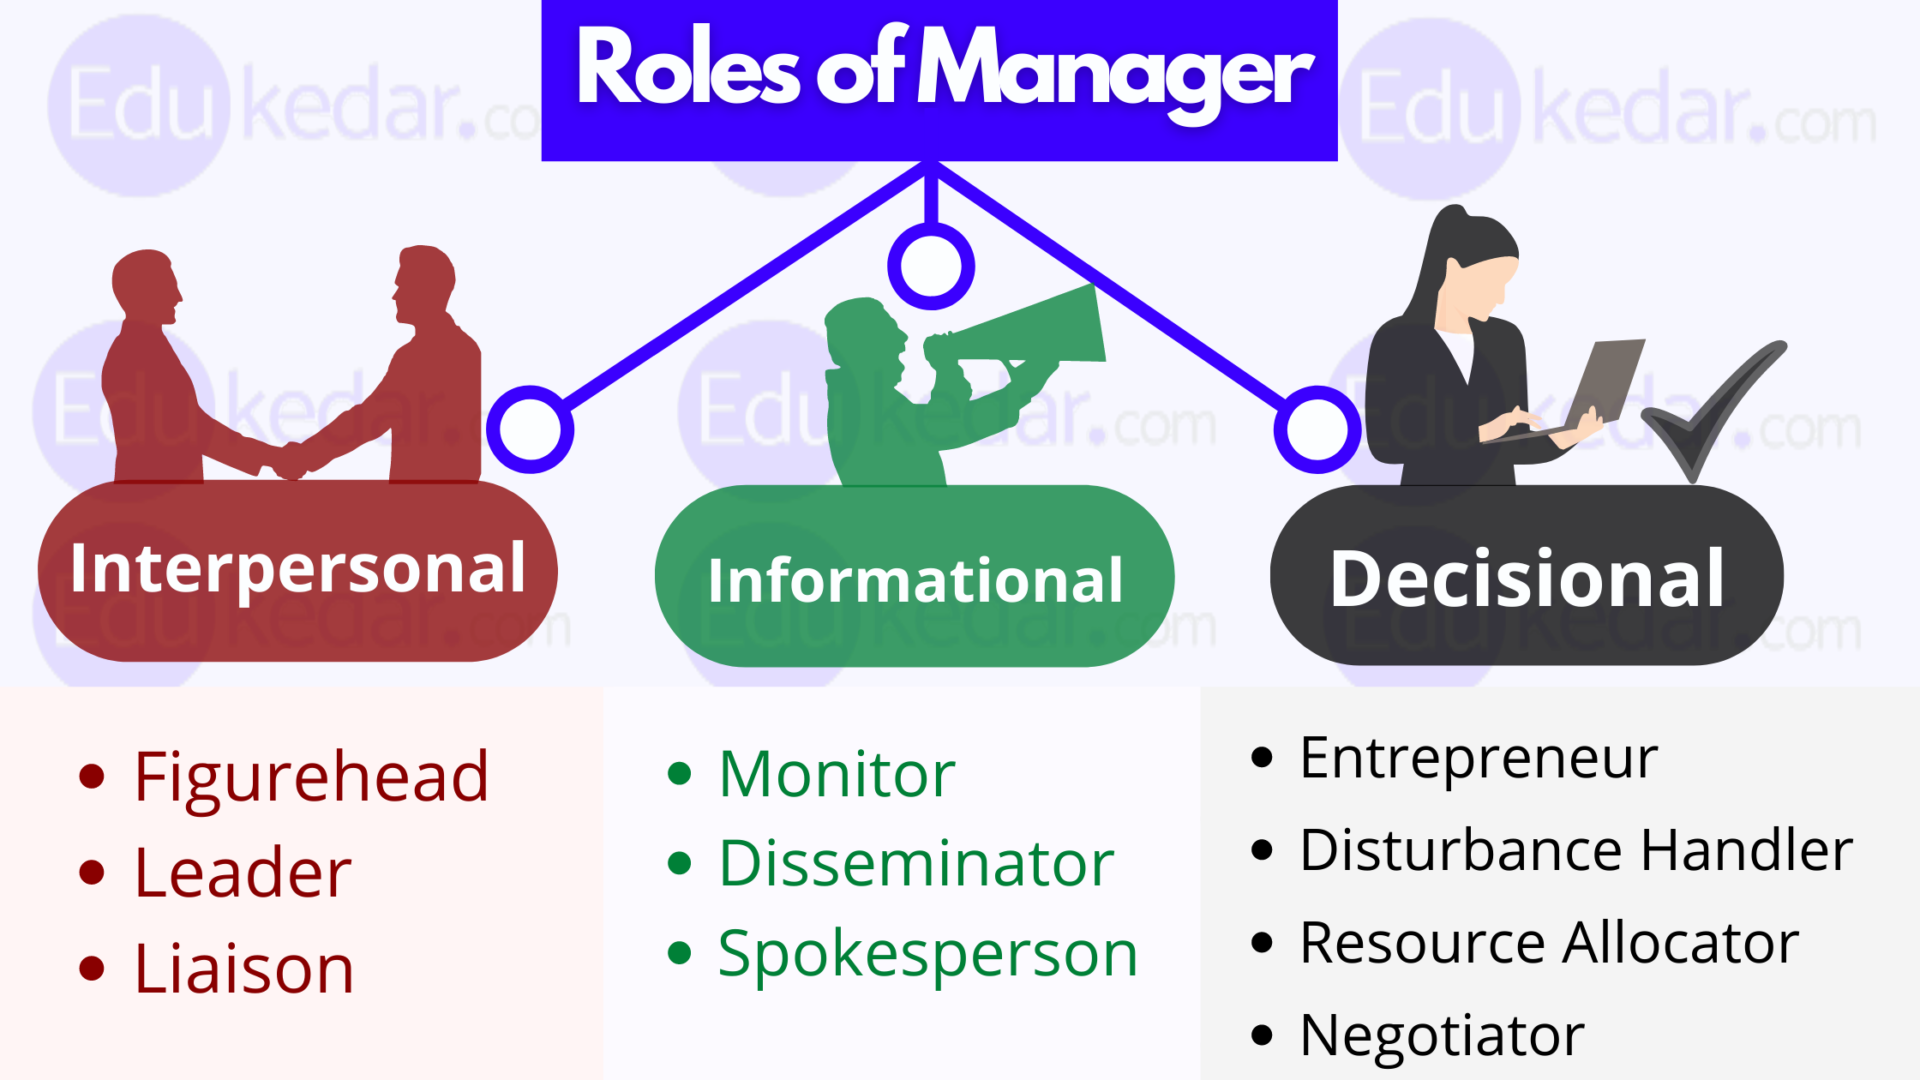 Role of information. Roles of Manager. Managerial roles. Henry Mintzberg Managerial roles. Interpersonal roles.